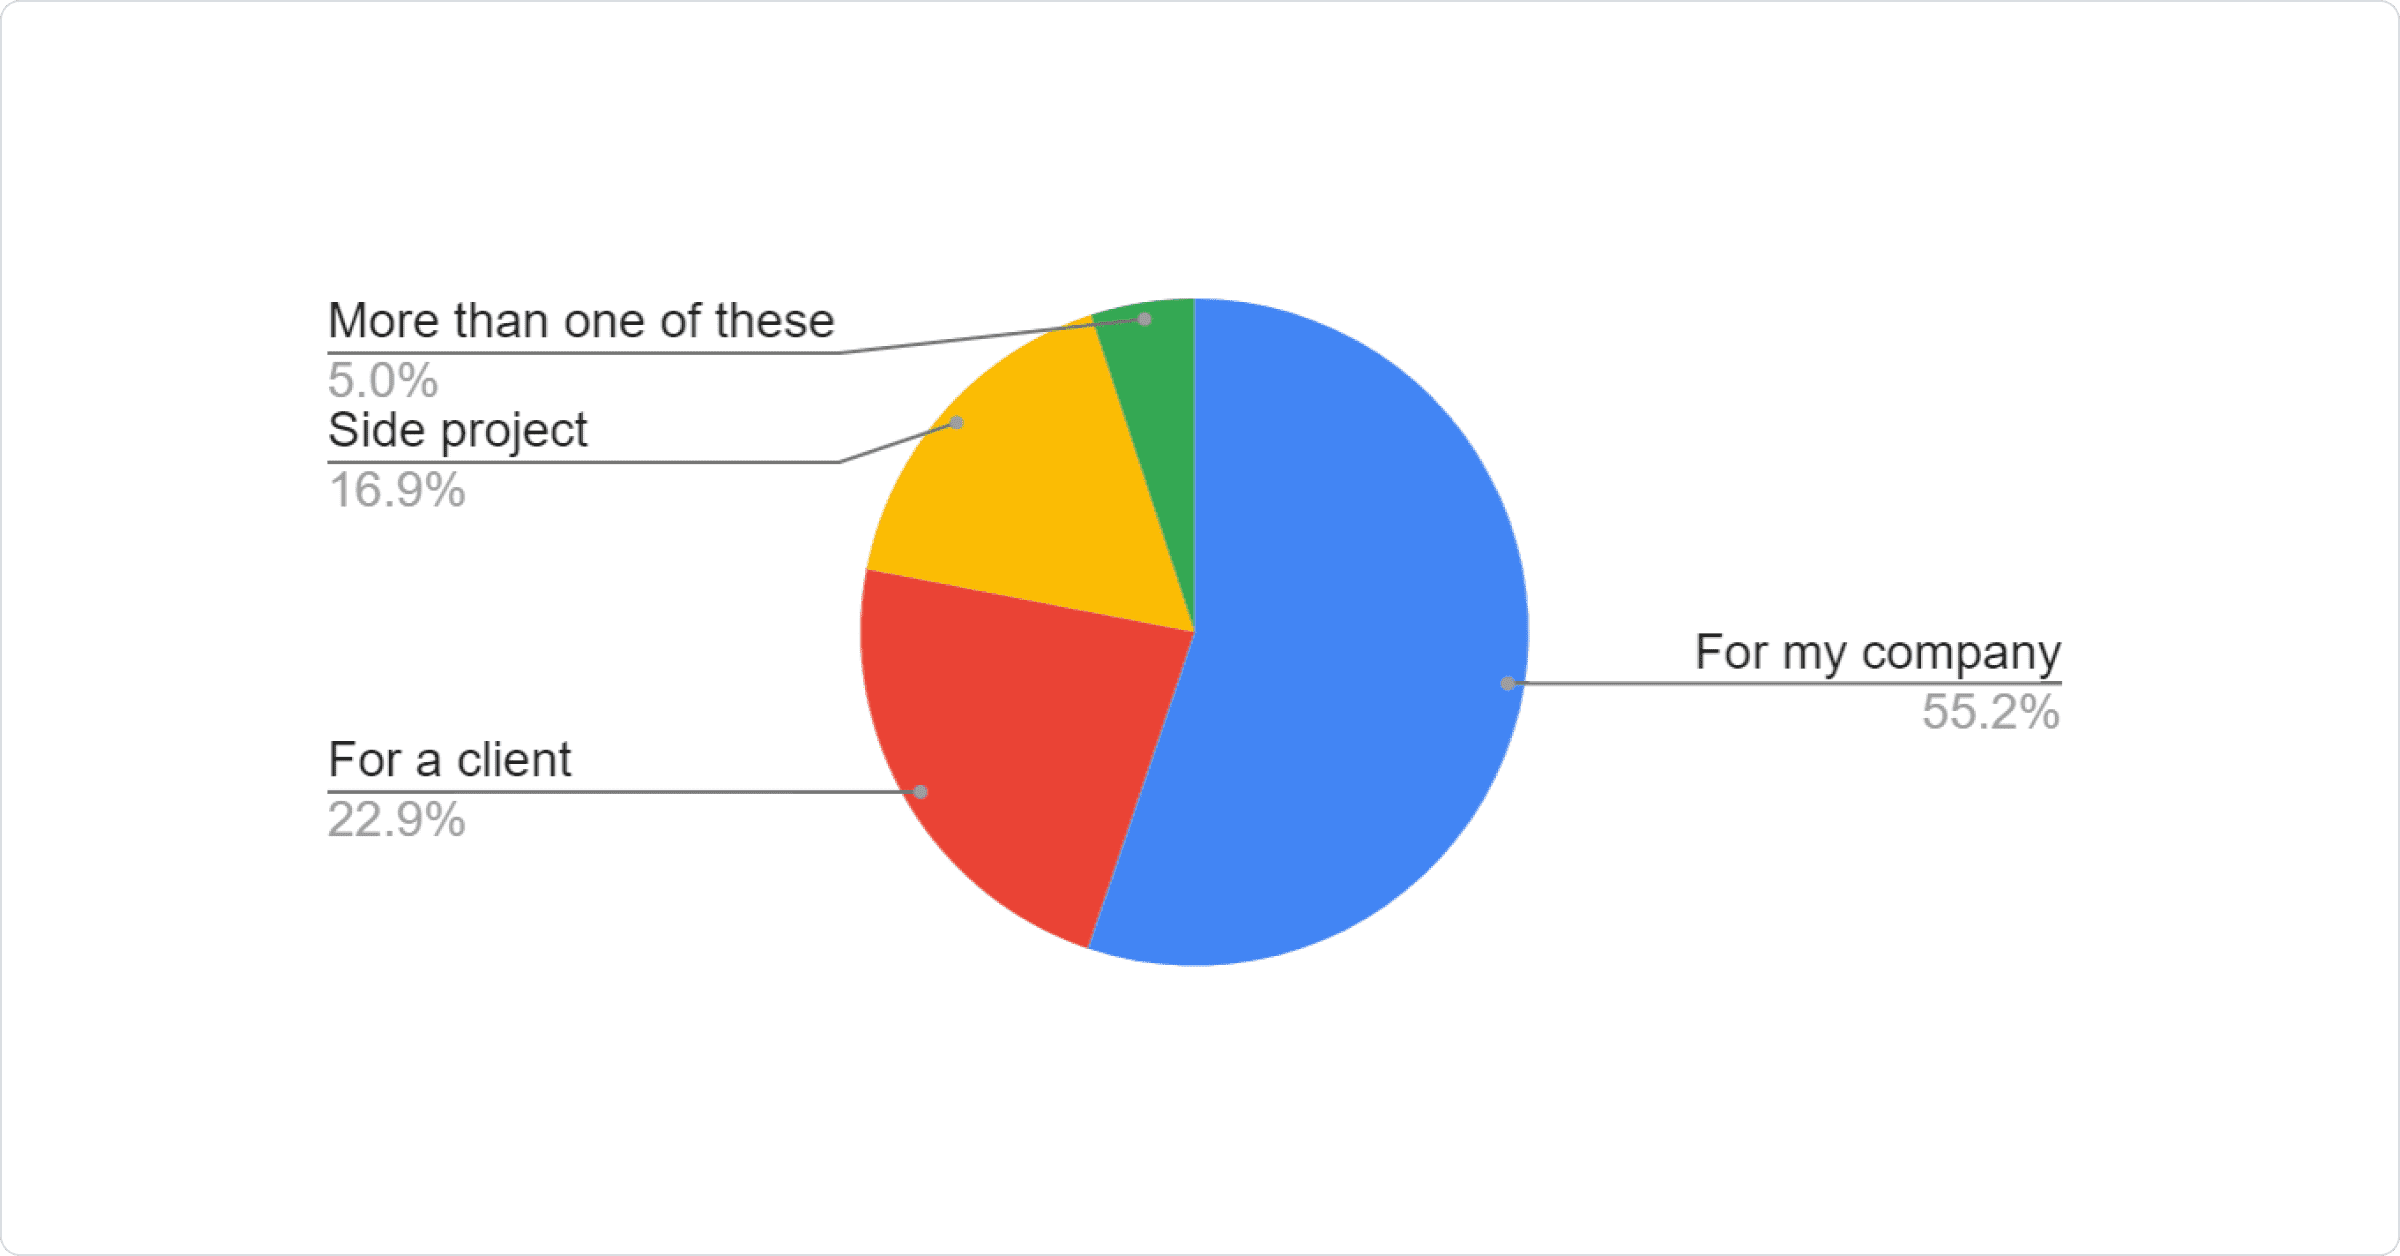 Pie chart: 55.17% For my company
22.86% For a client, 16.94% Side project, 5.03% More than one of these.